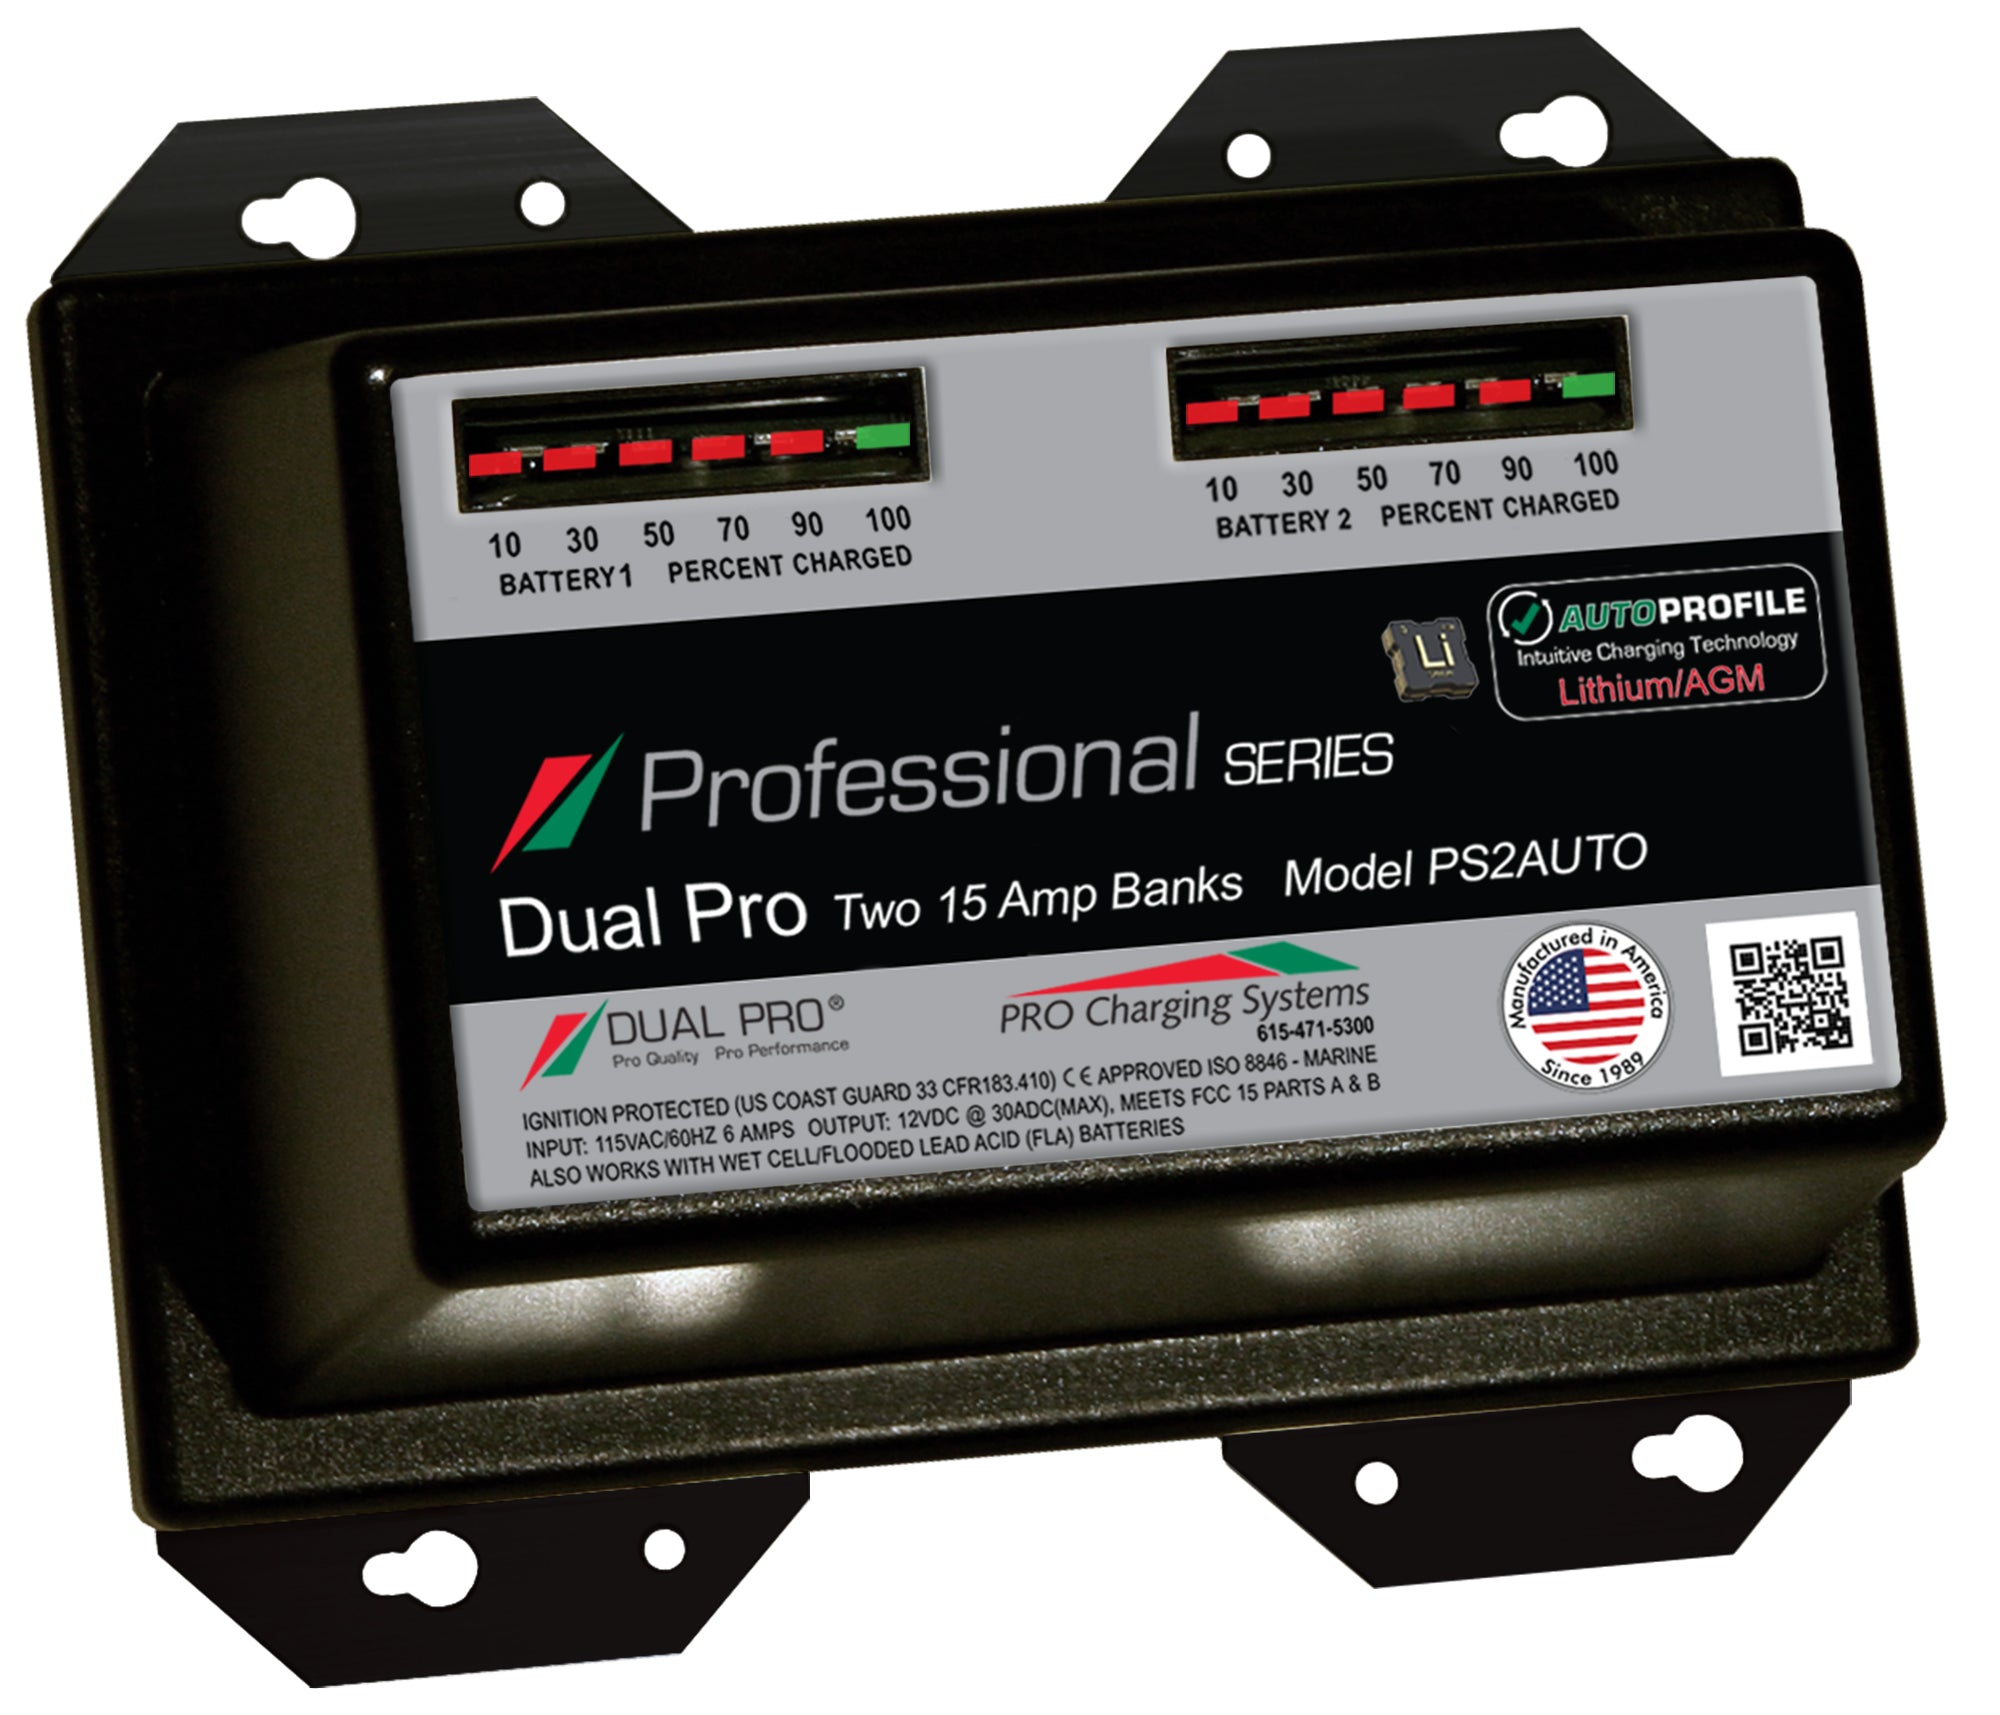 Dual Pro PS2AUTO Battery Charger, Auto Profile 2 Bank 30 Amps